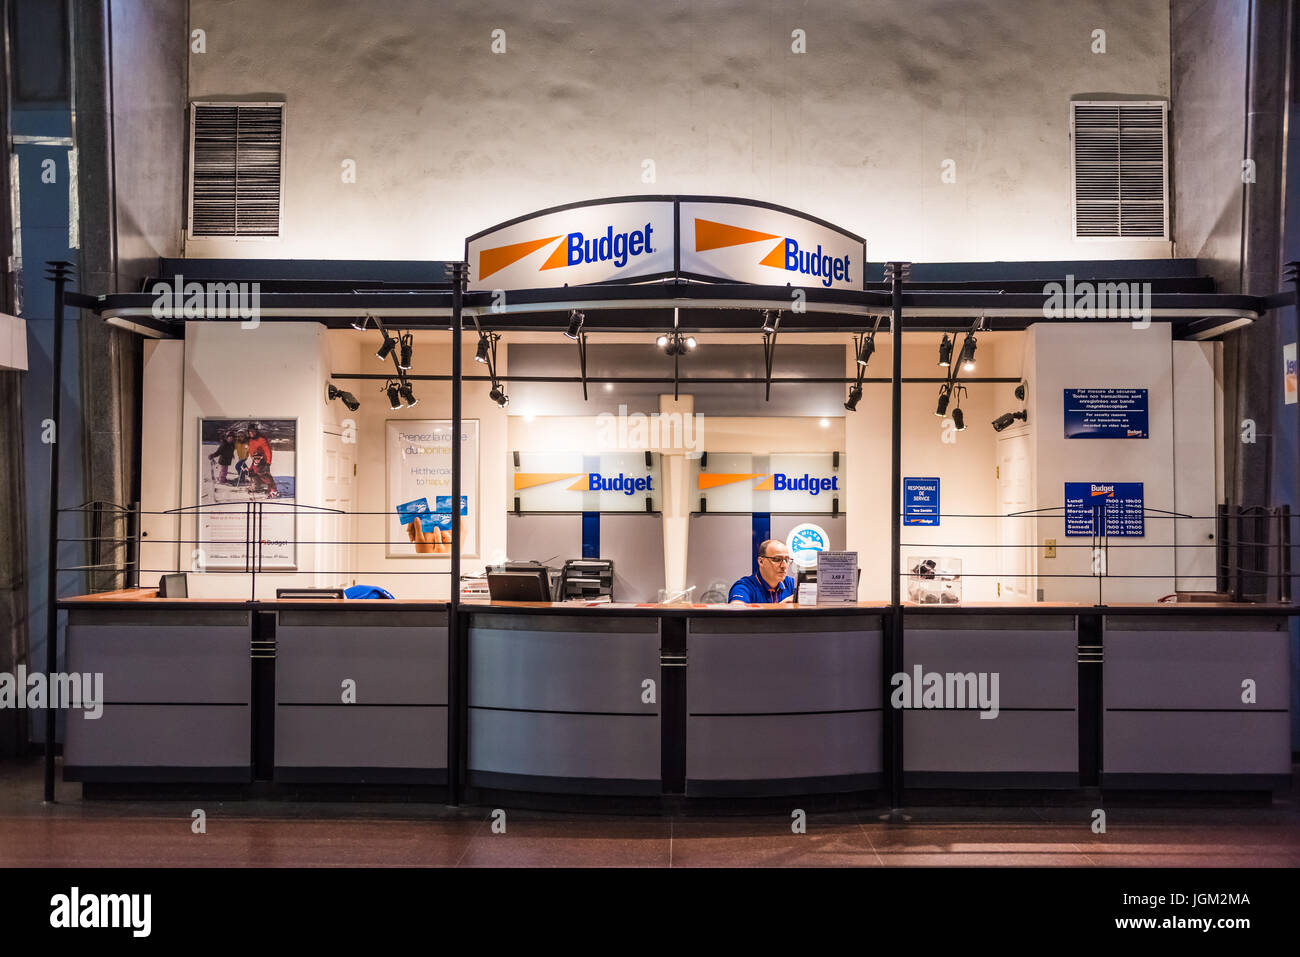 Montreal, Canada - May 26, 2017: Budget rental office in underground city in Quebec region in train station with employee Stock Photo